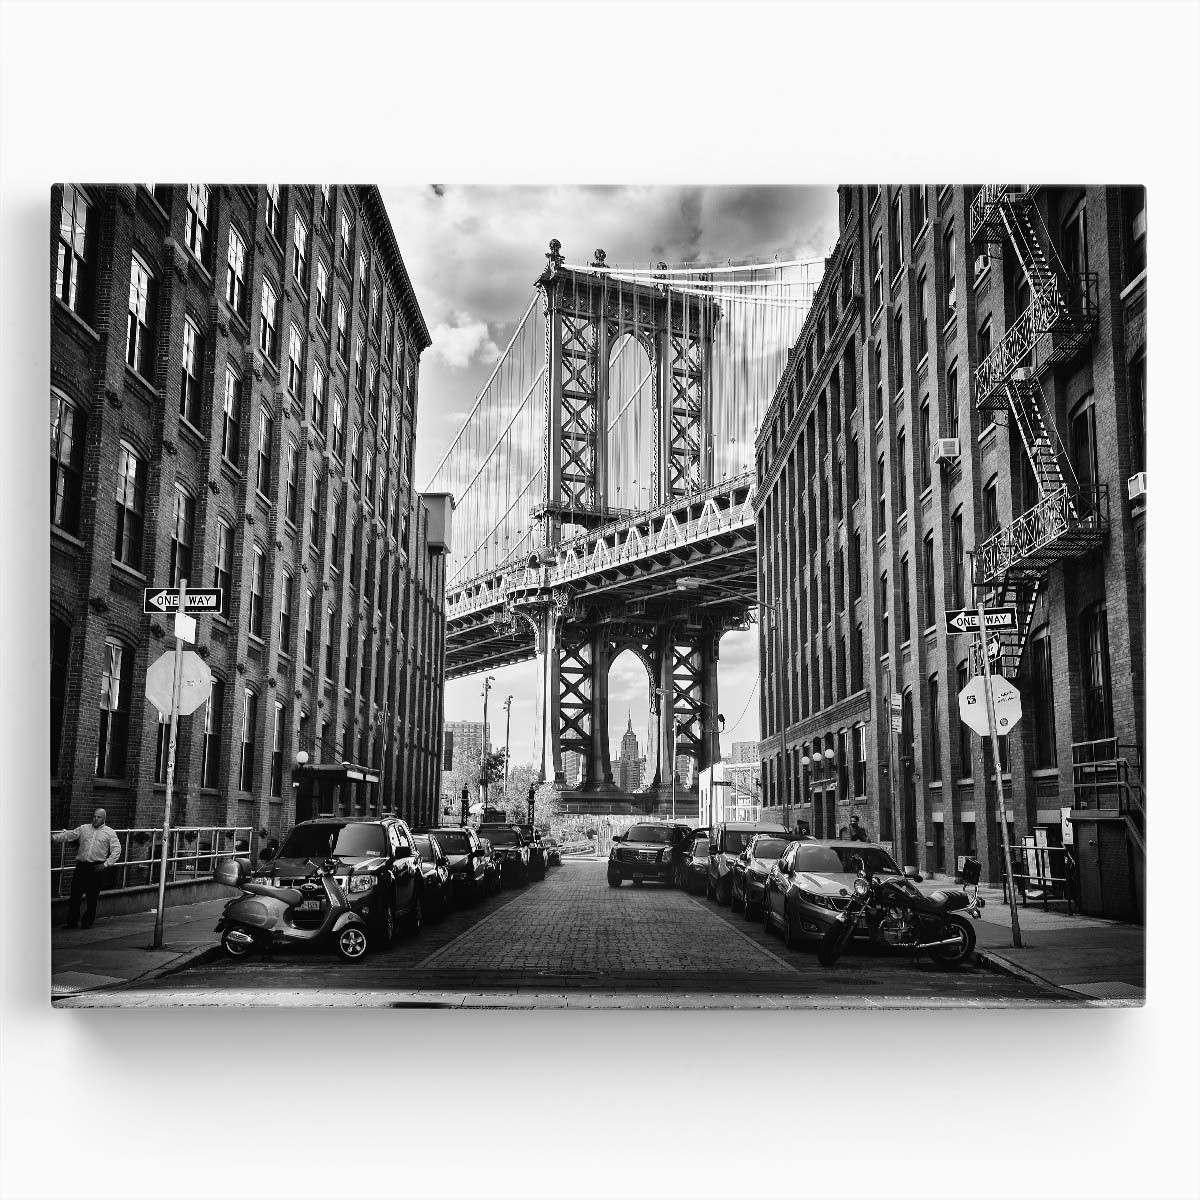 Iconic NYC Manhattan Bridge Monochrome Photography Wall Art by Luxuriance Designs. Made in USA.